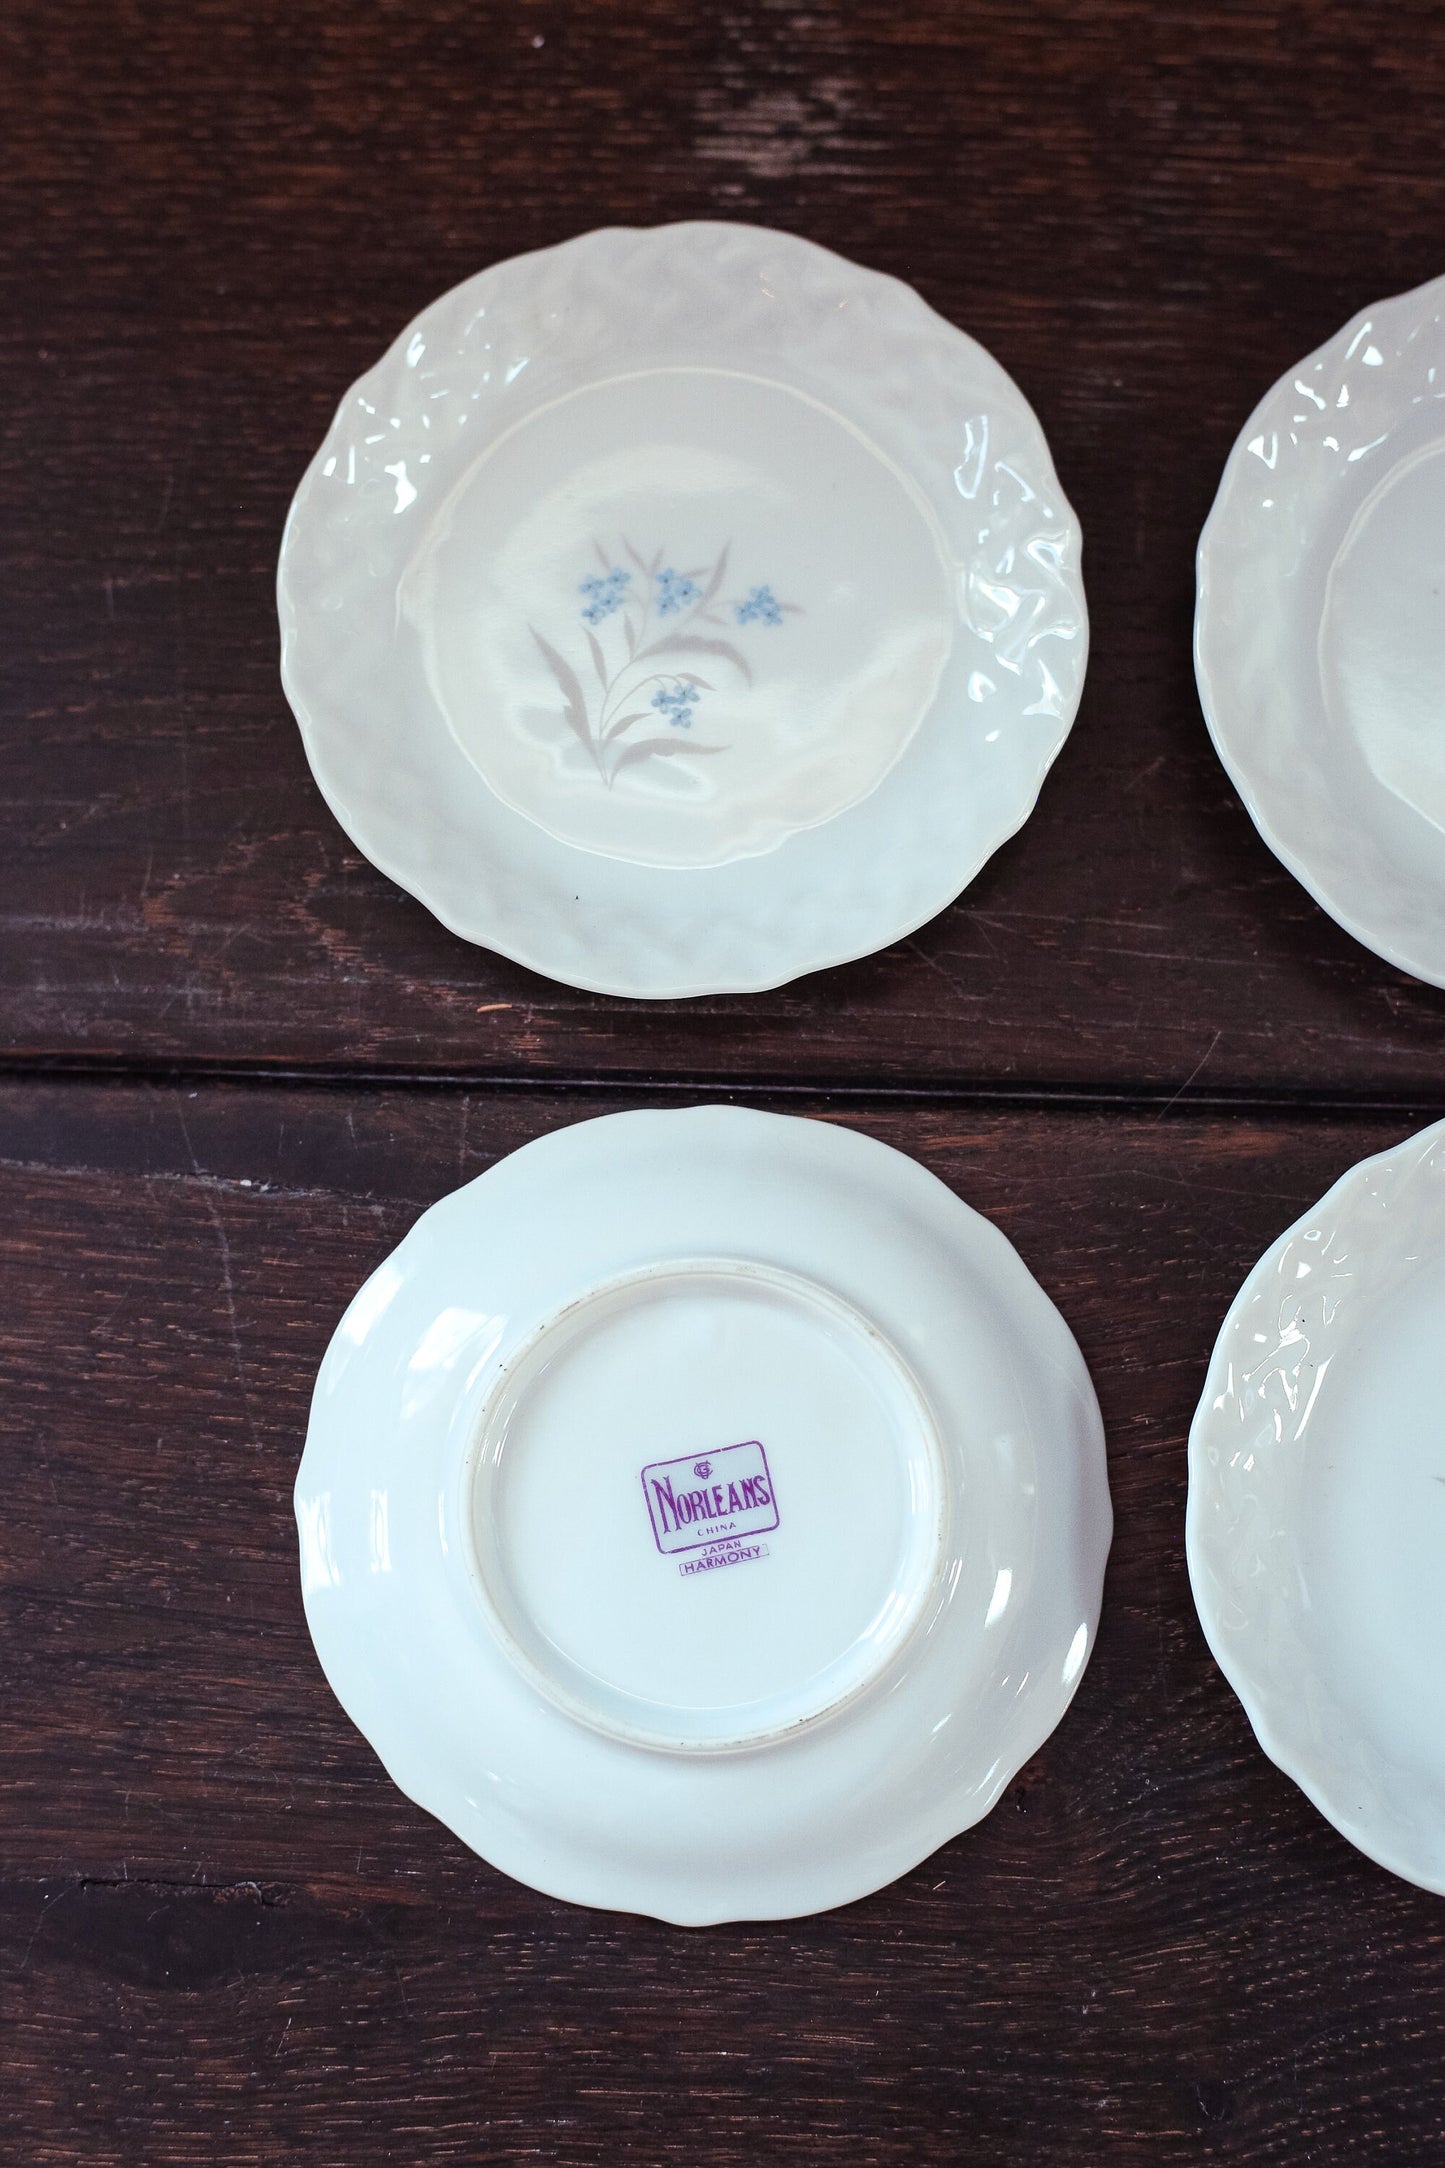 Small Porcelain Plates with Blue & Silver Flowers - Set of 4 Vintage Petite Porcelain Dishes 